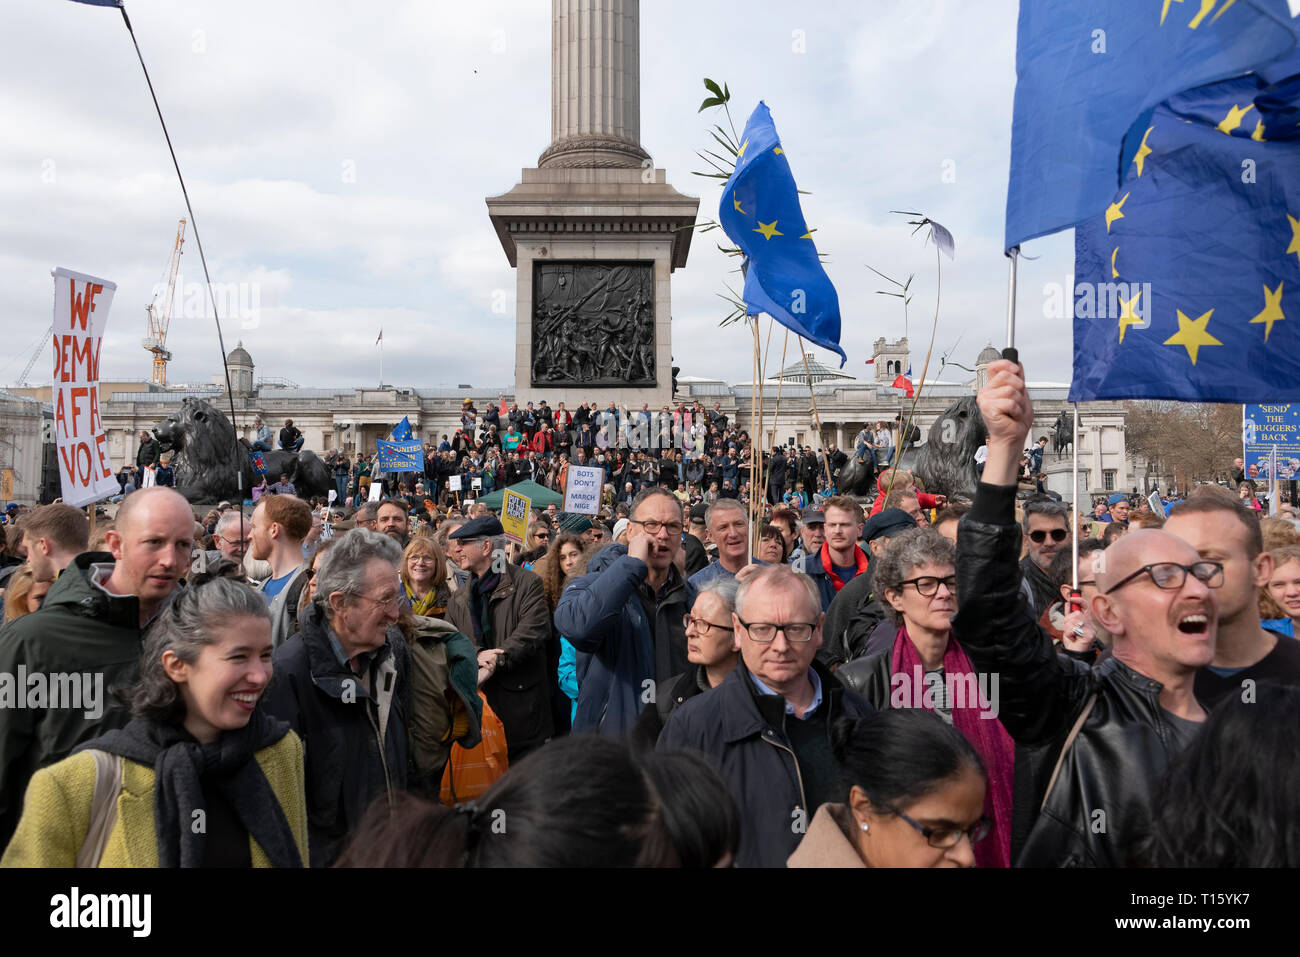 London, UK. 23rd Mar, 2019. Peoples Vote March, Trafalgar Square. Crowd detail and banners as taken from the perspective of a protester. Remain banners, second referendum. Credit: Tony Pincham/Alamy Live News Stock Photo